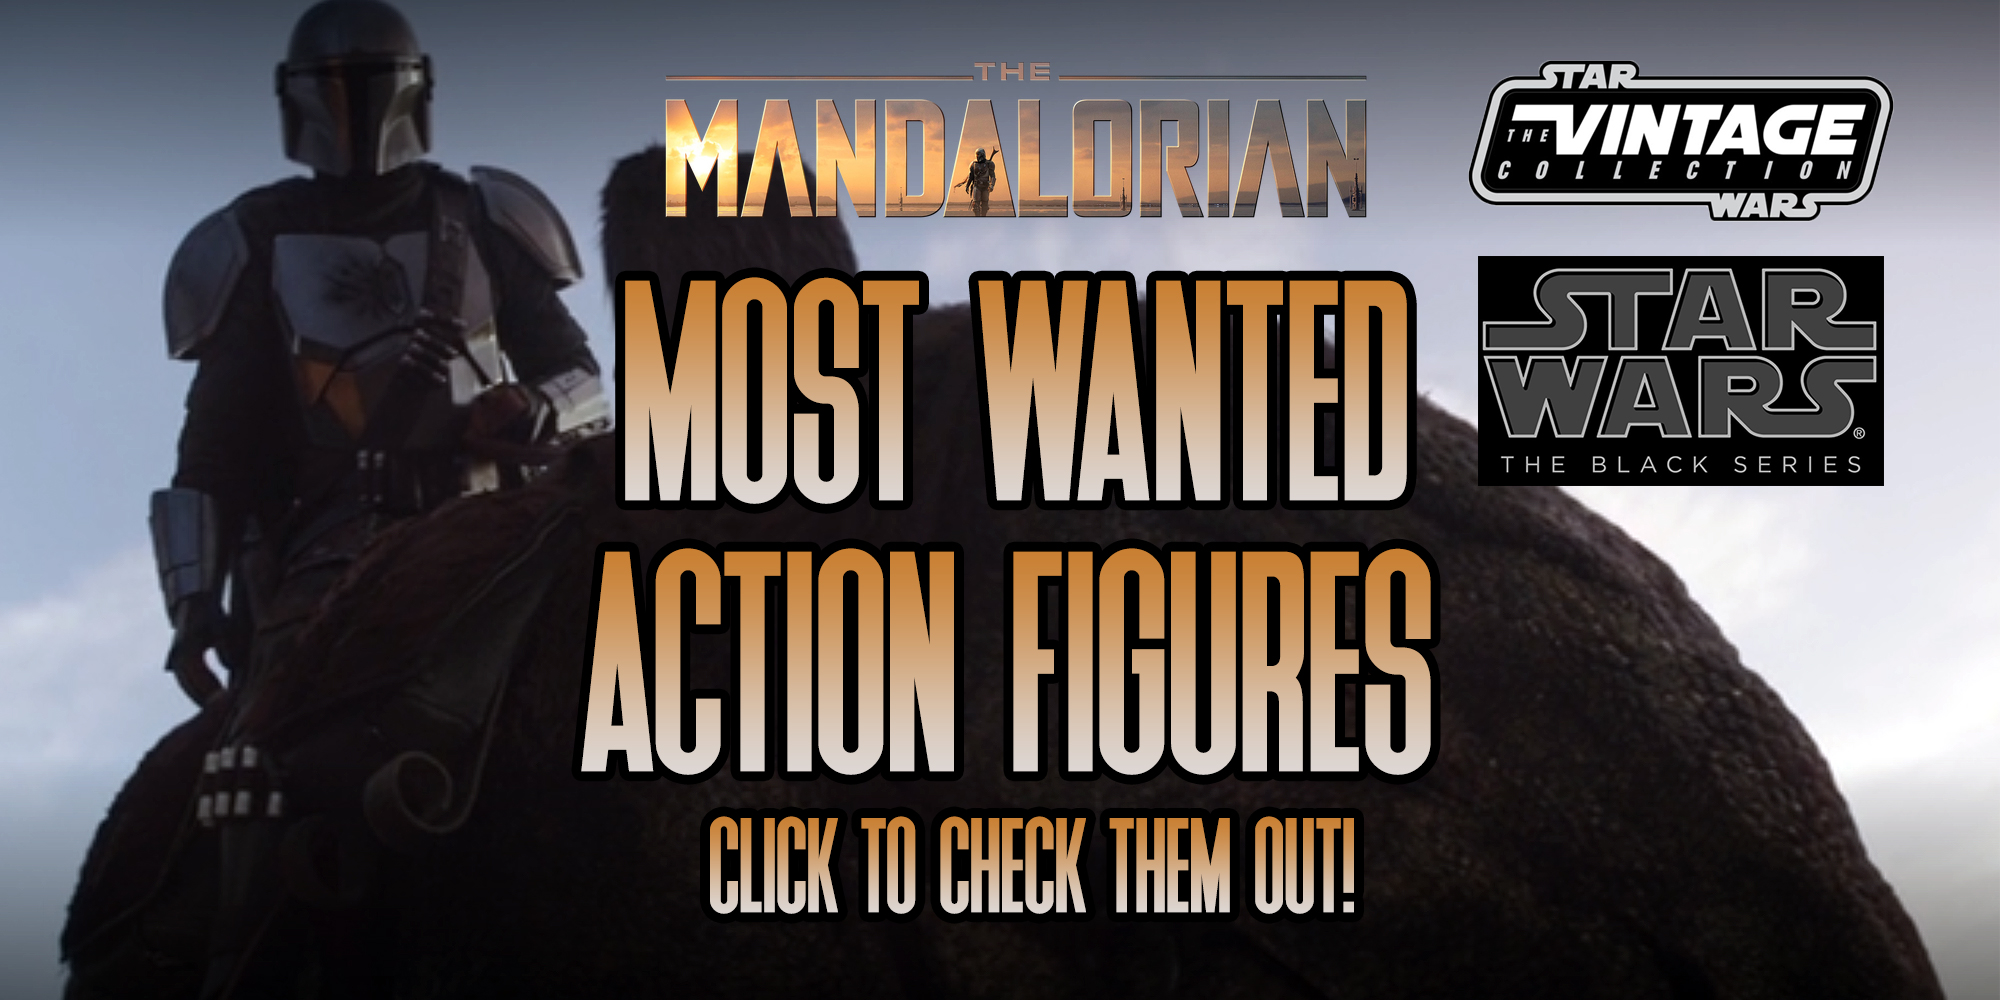 Most Wanted Figures From The Mandalorian!